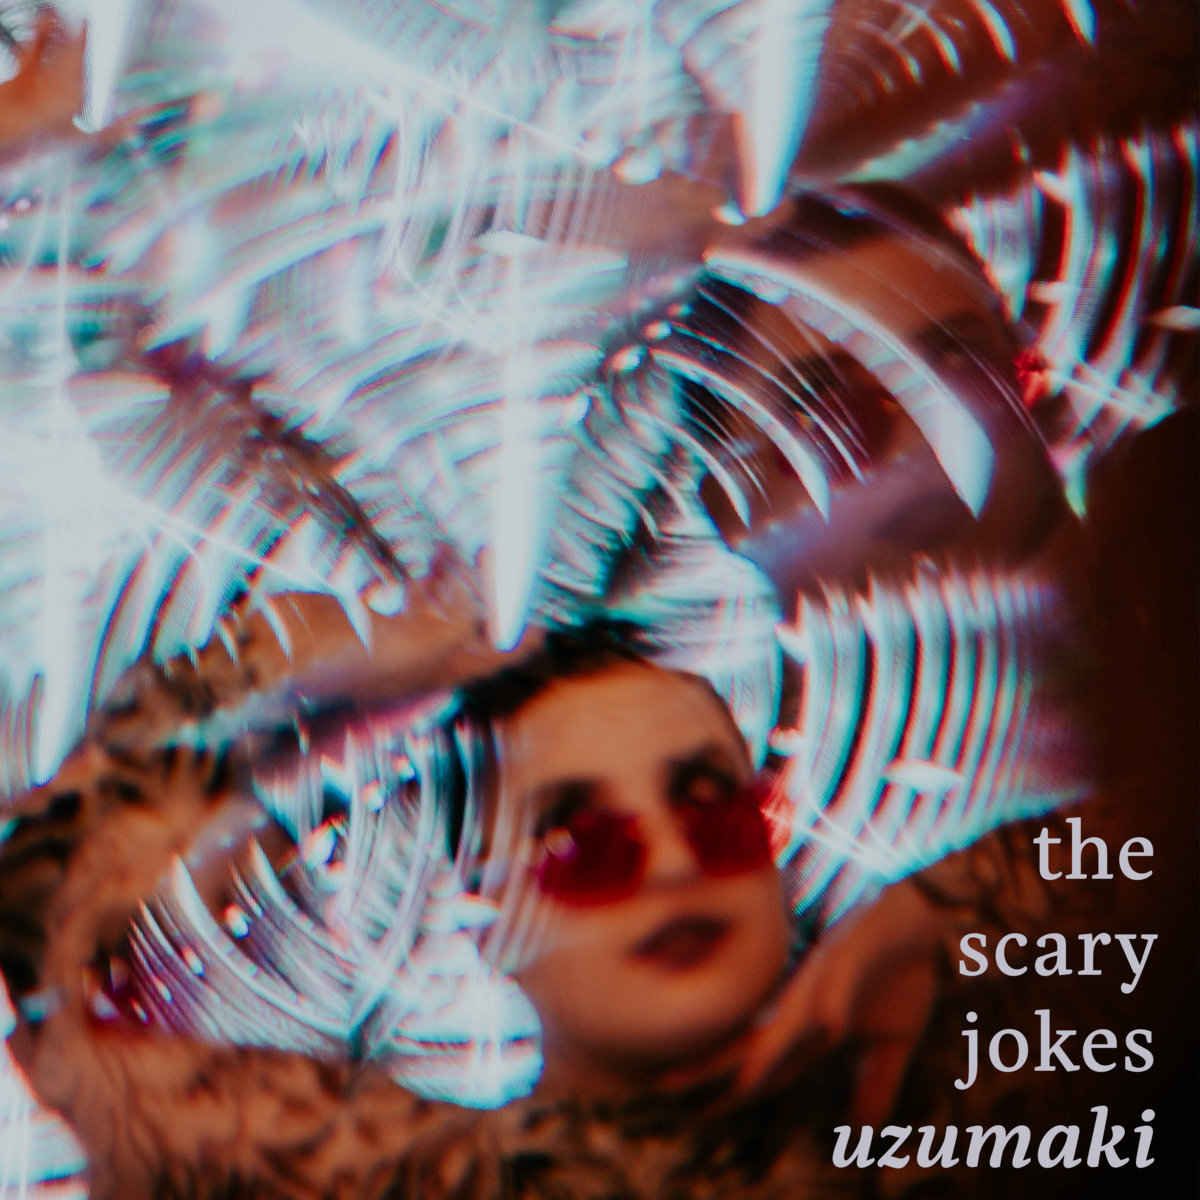 THE ALBUM COVER FOR UZUMAKI BY THE SCARY JOKES.